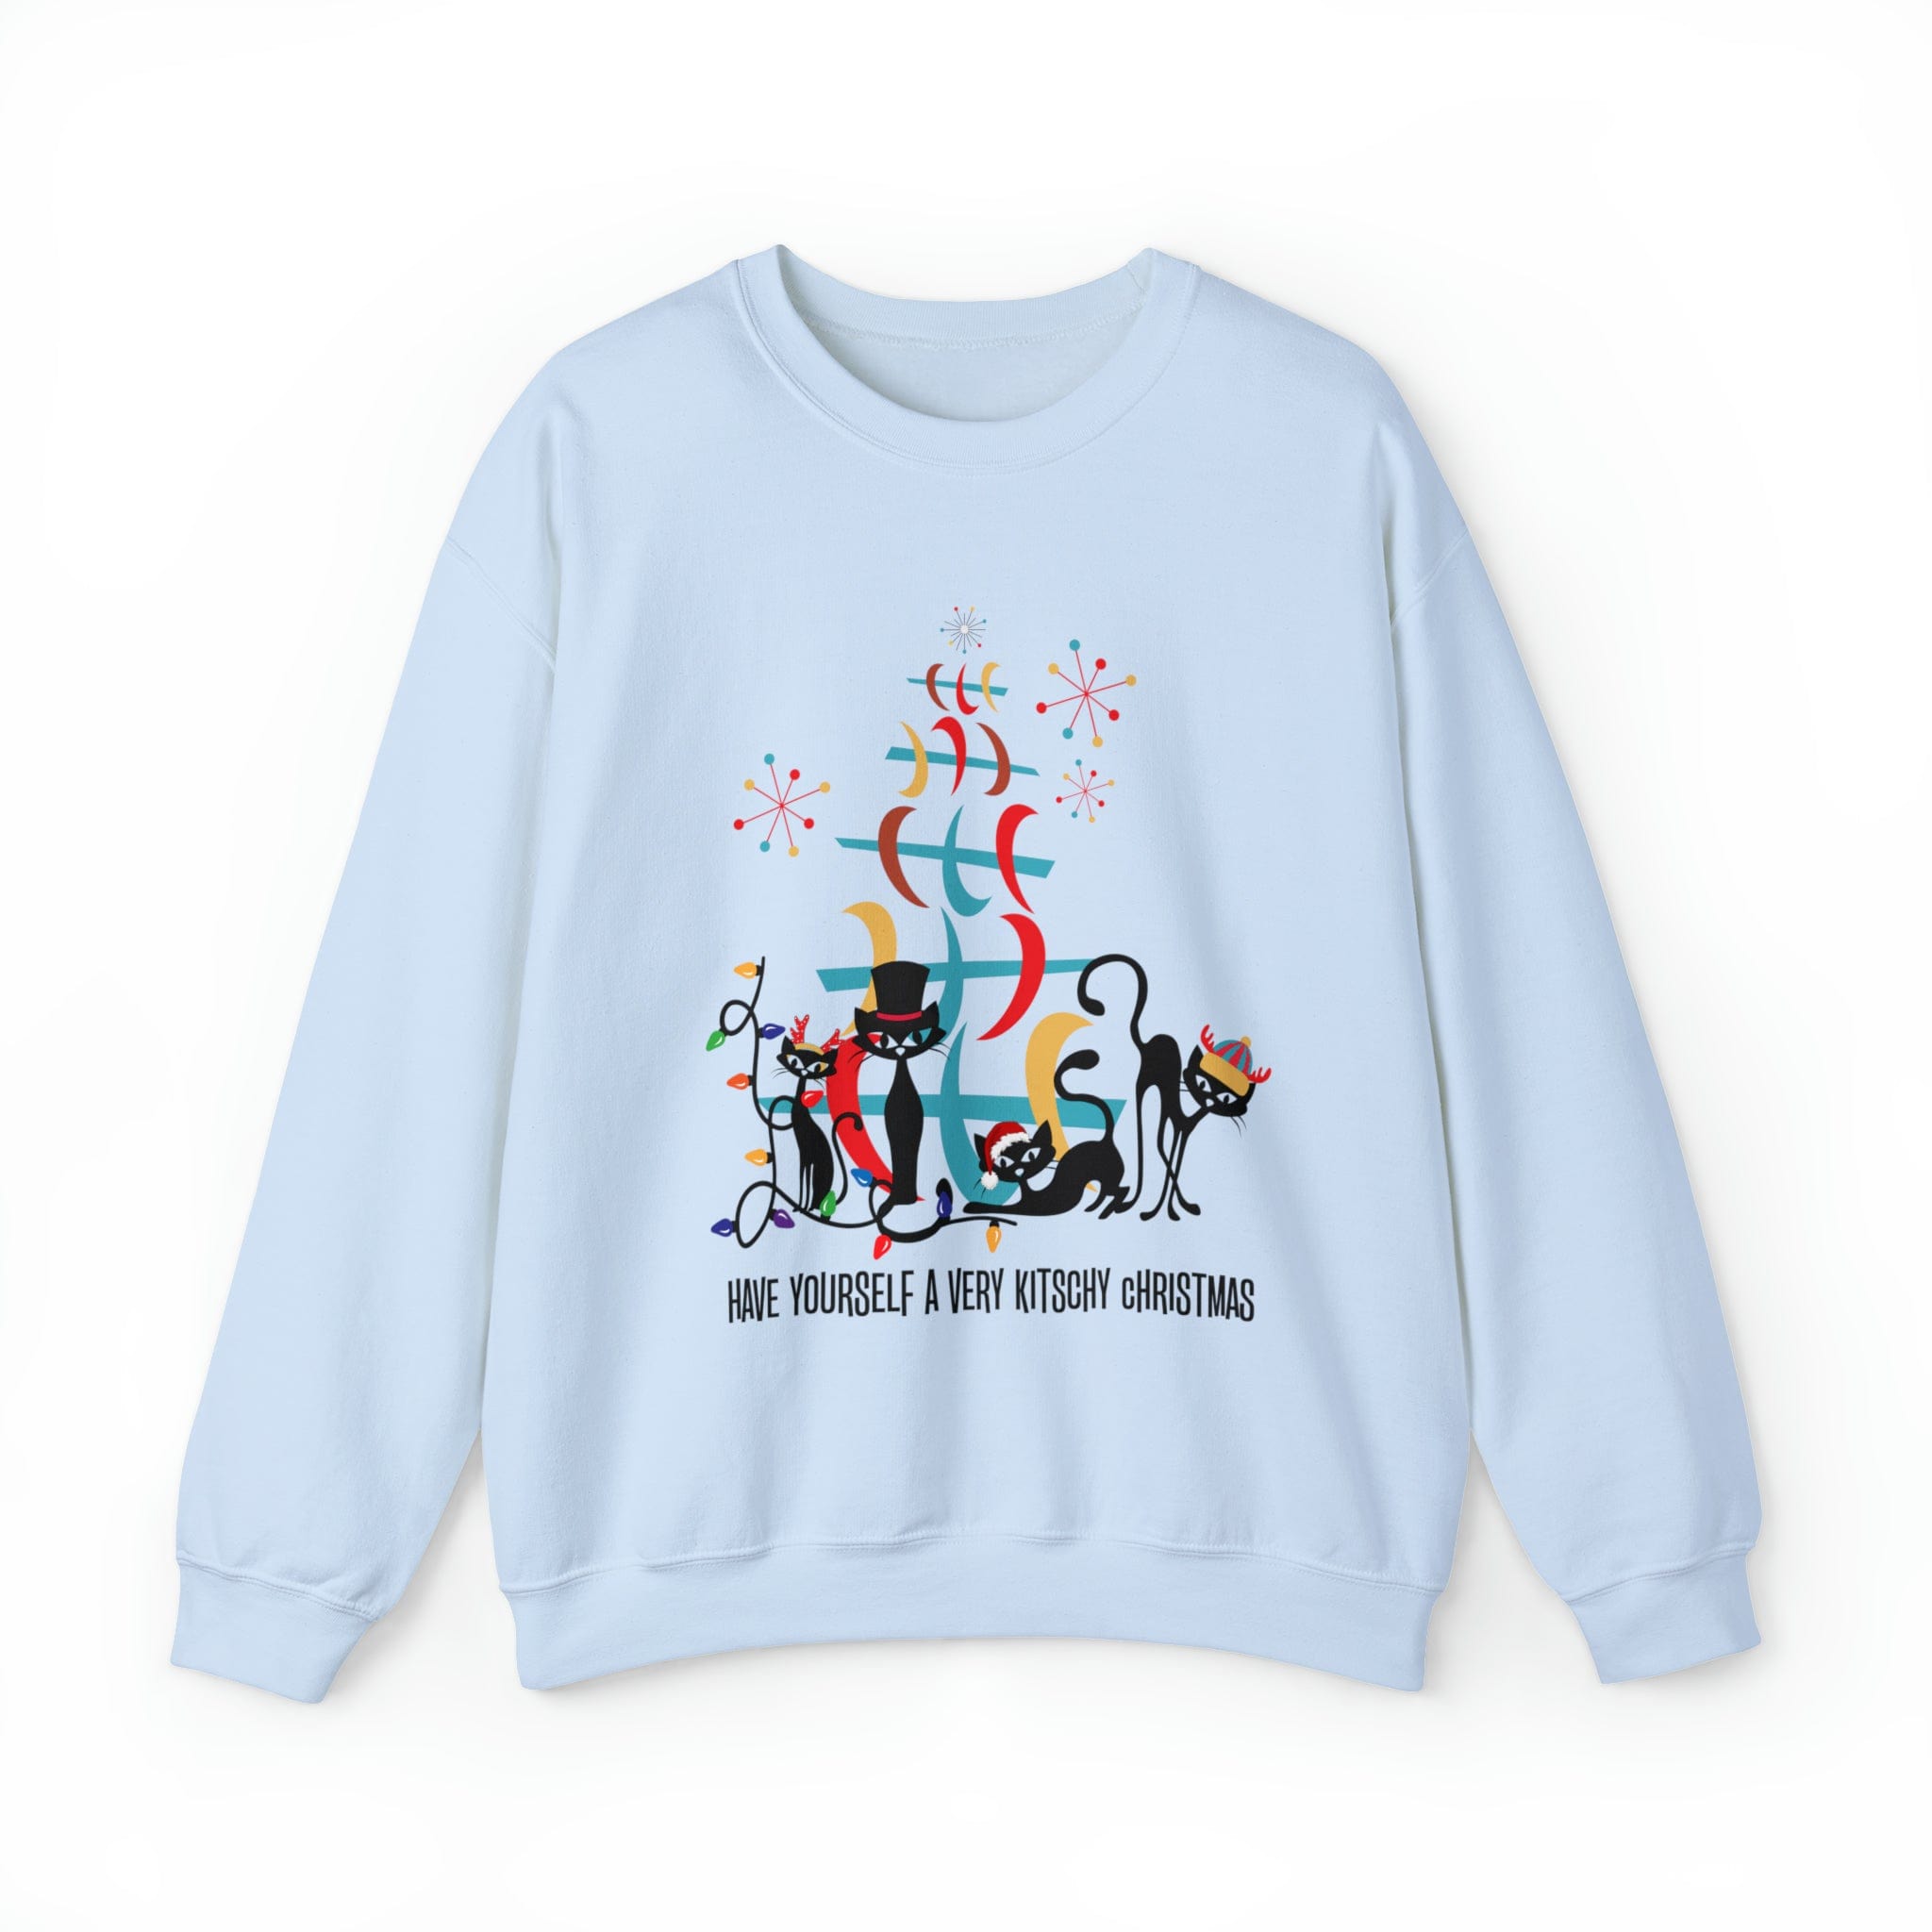 Atomic Cat Christmas Sweater, Have Yourself A Very Kitschy Christmas Cozy Loose Fit, Sweatshirt Sweatshirt 2XL / Light Blue